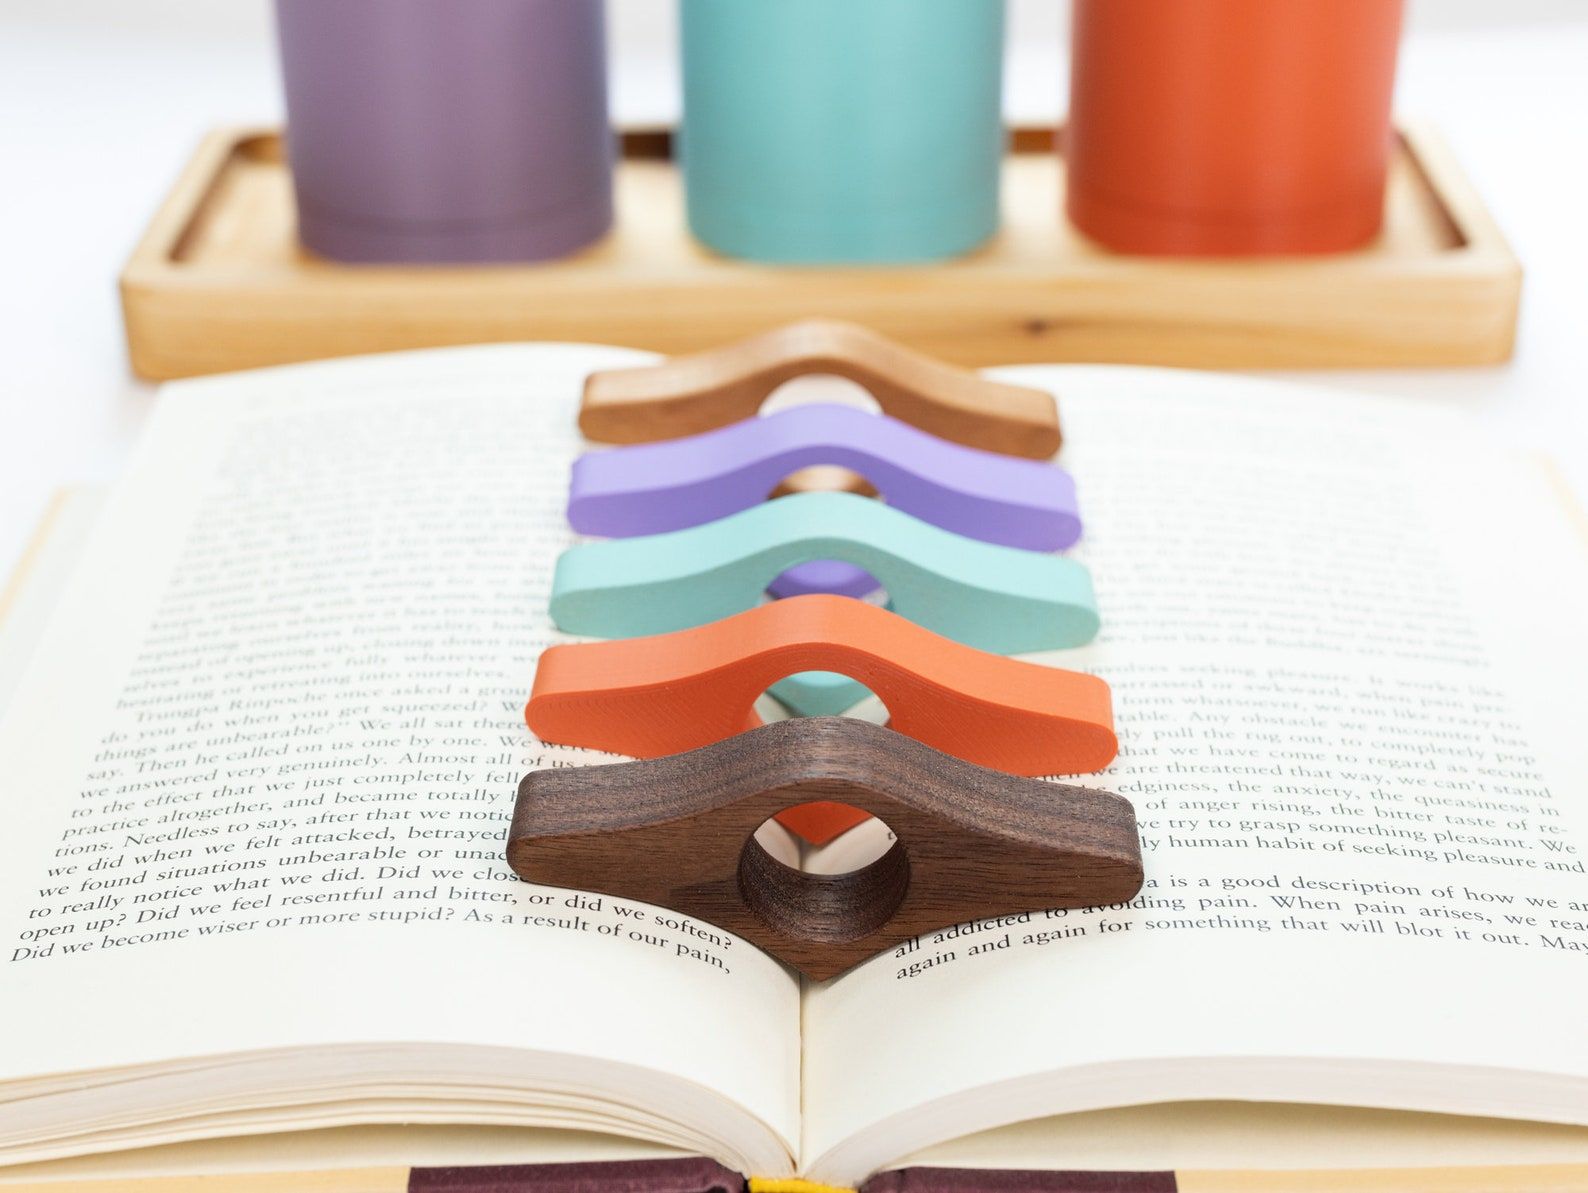 Set of four book page thumb holder in wood grain, turquoise, orange, and lavender